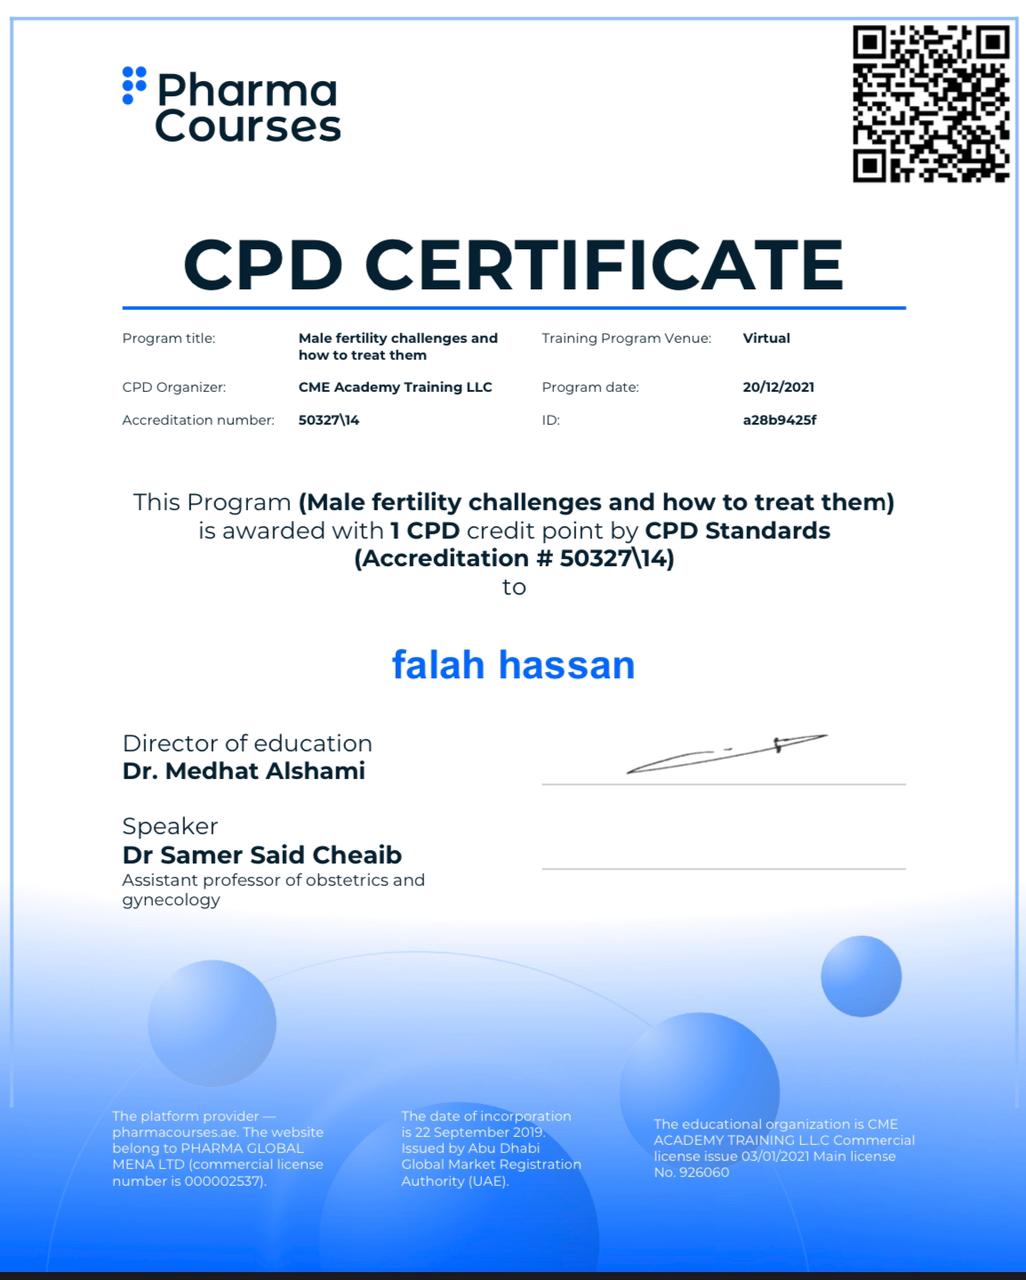 A faculty member at the College of Pharmacy receives a certificate of participation in an international workshop on male infertility